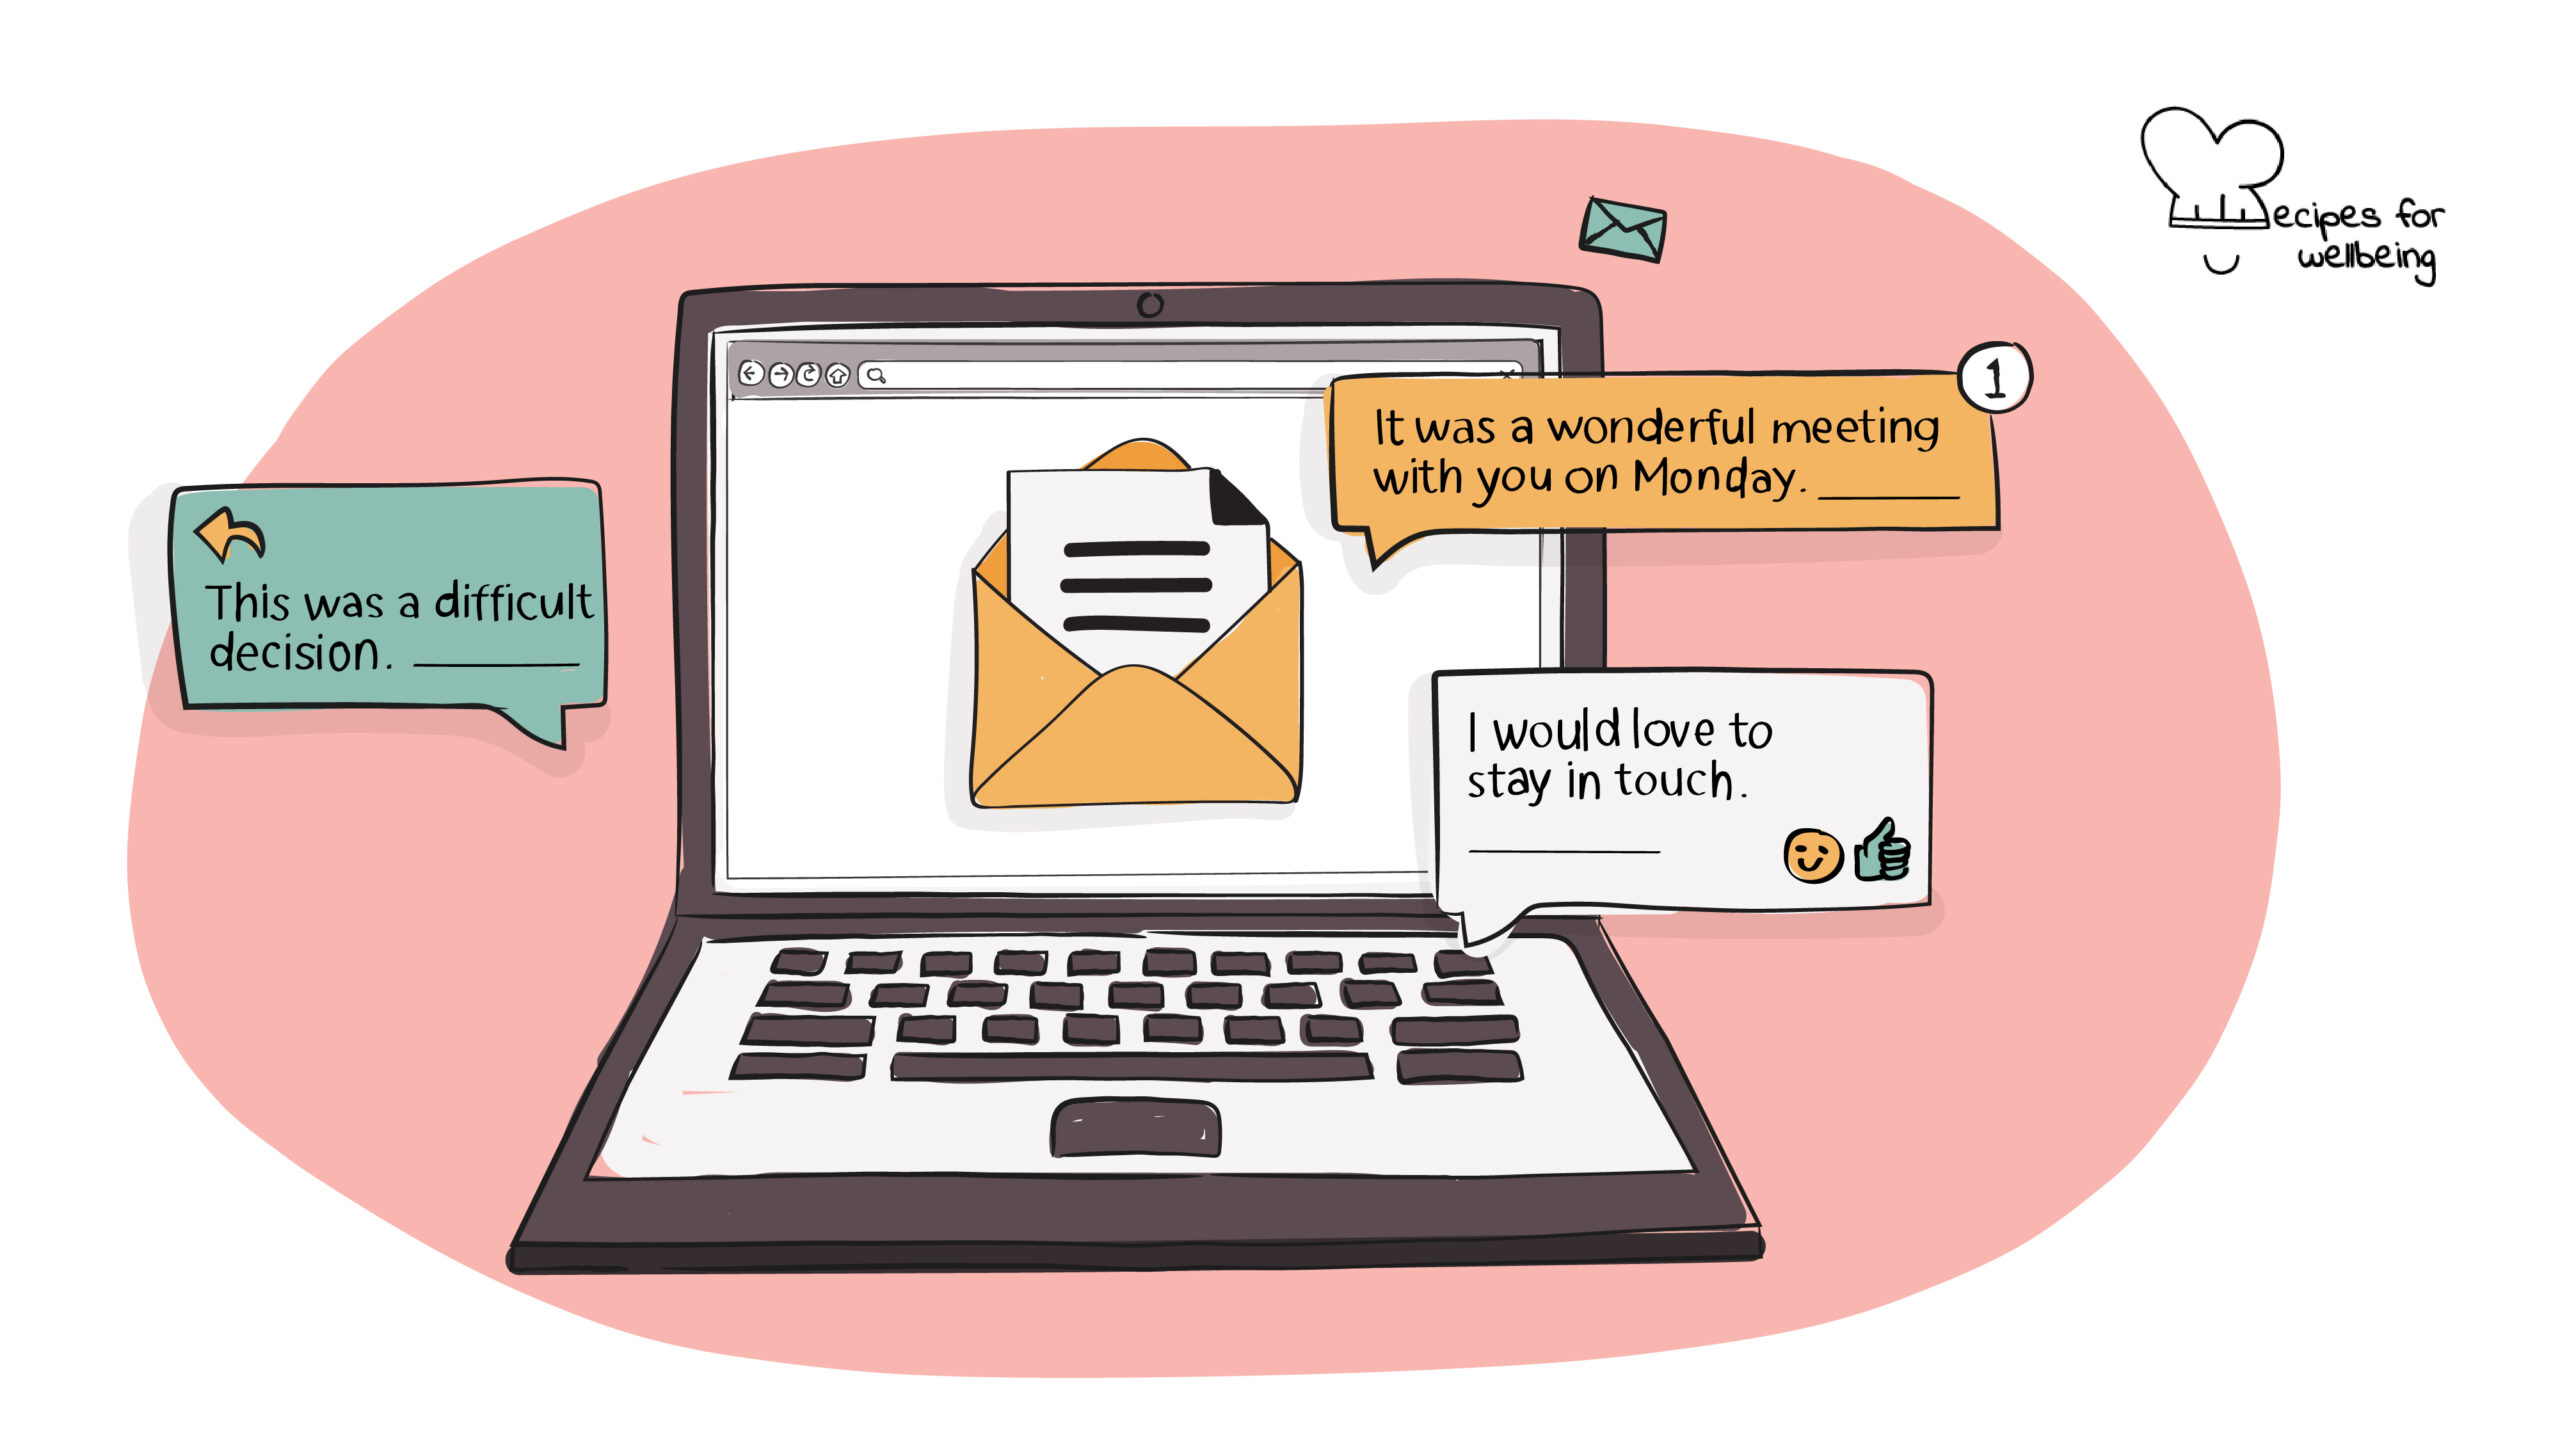 Illustration of a laptop with an envelope icon to symbolise an email being sent. © Recipes for Wellbeing